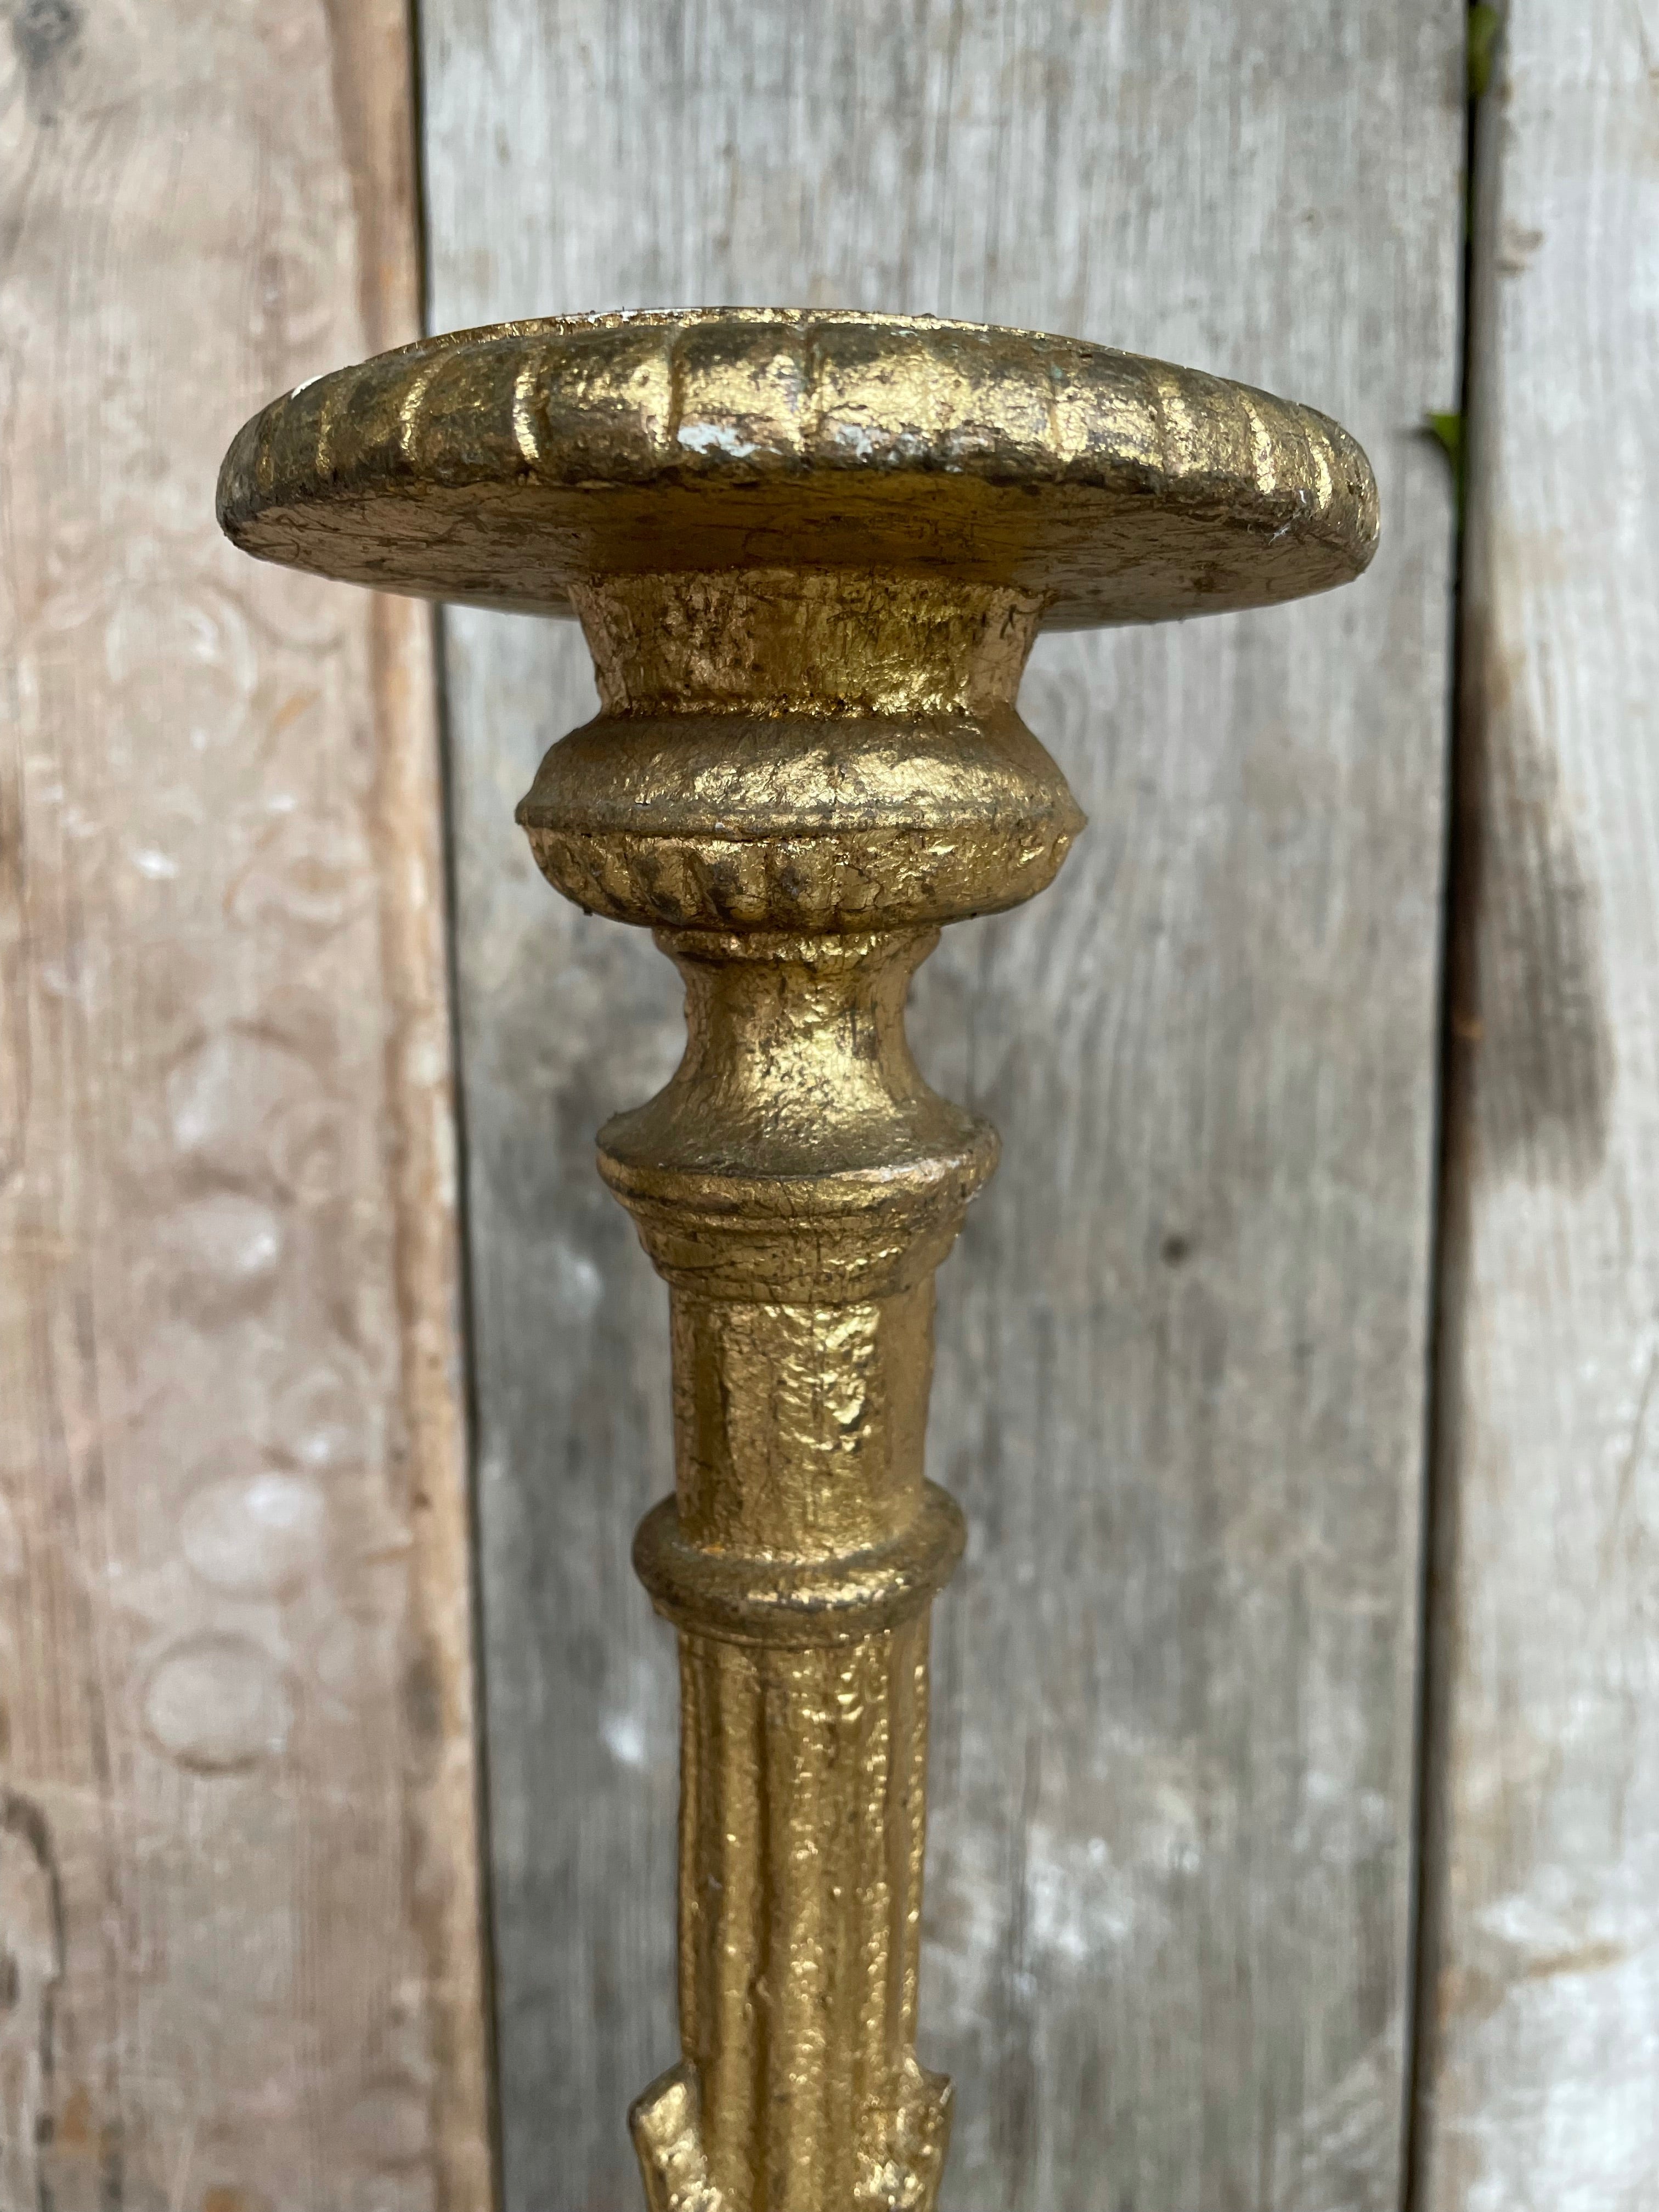 Pair of Giltwood Handcarved Church Candlesticks